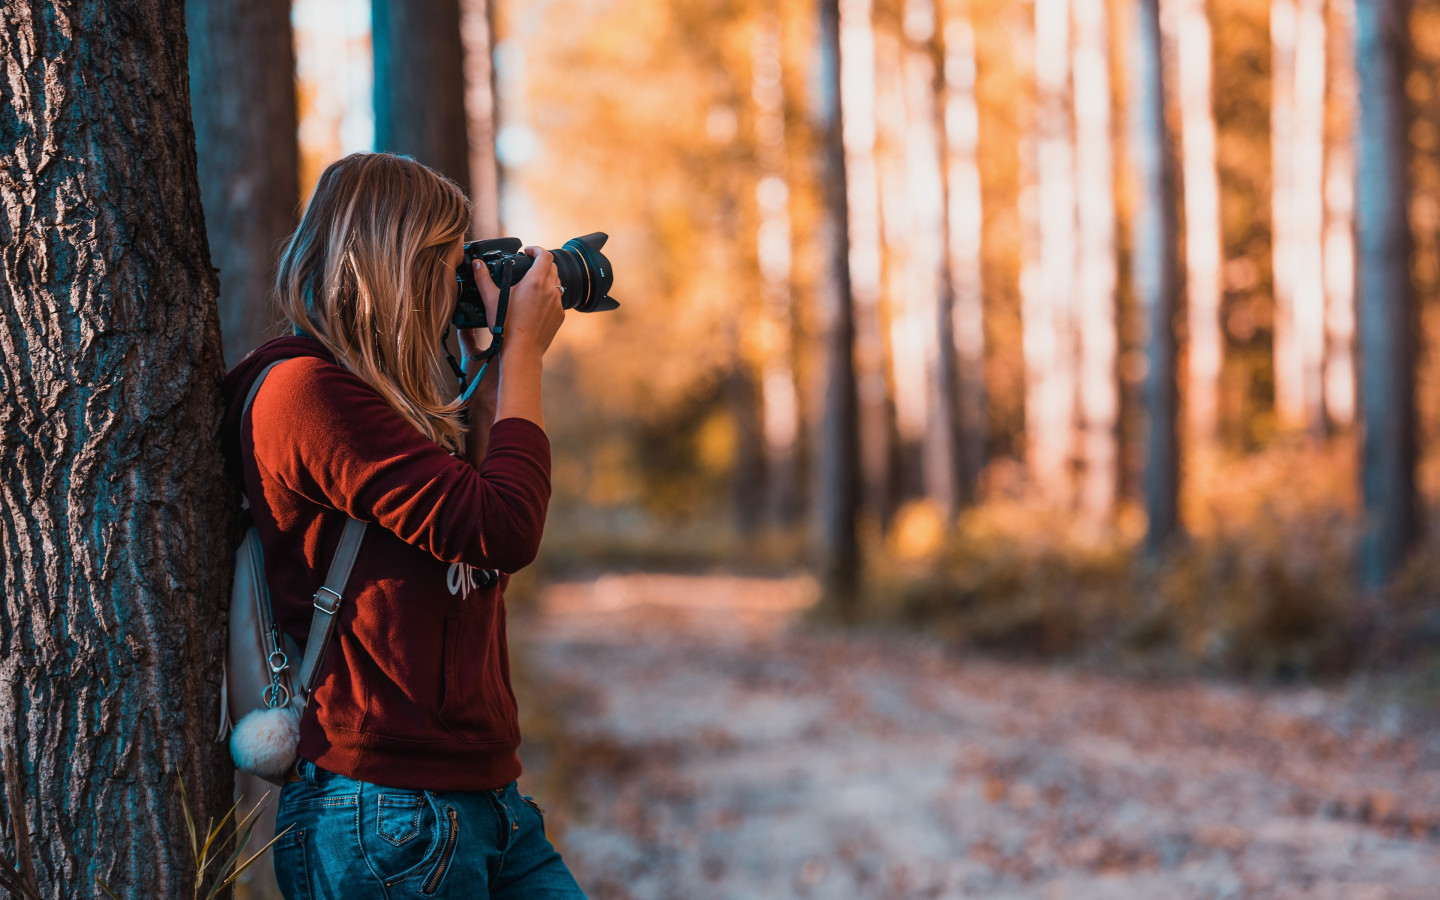 Photographer takes pictures in nature wallpaper 1440x900